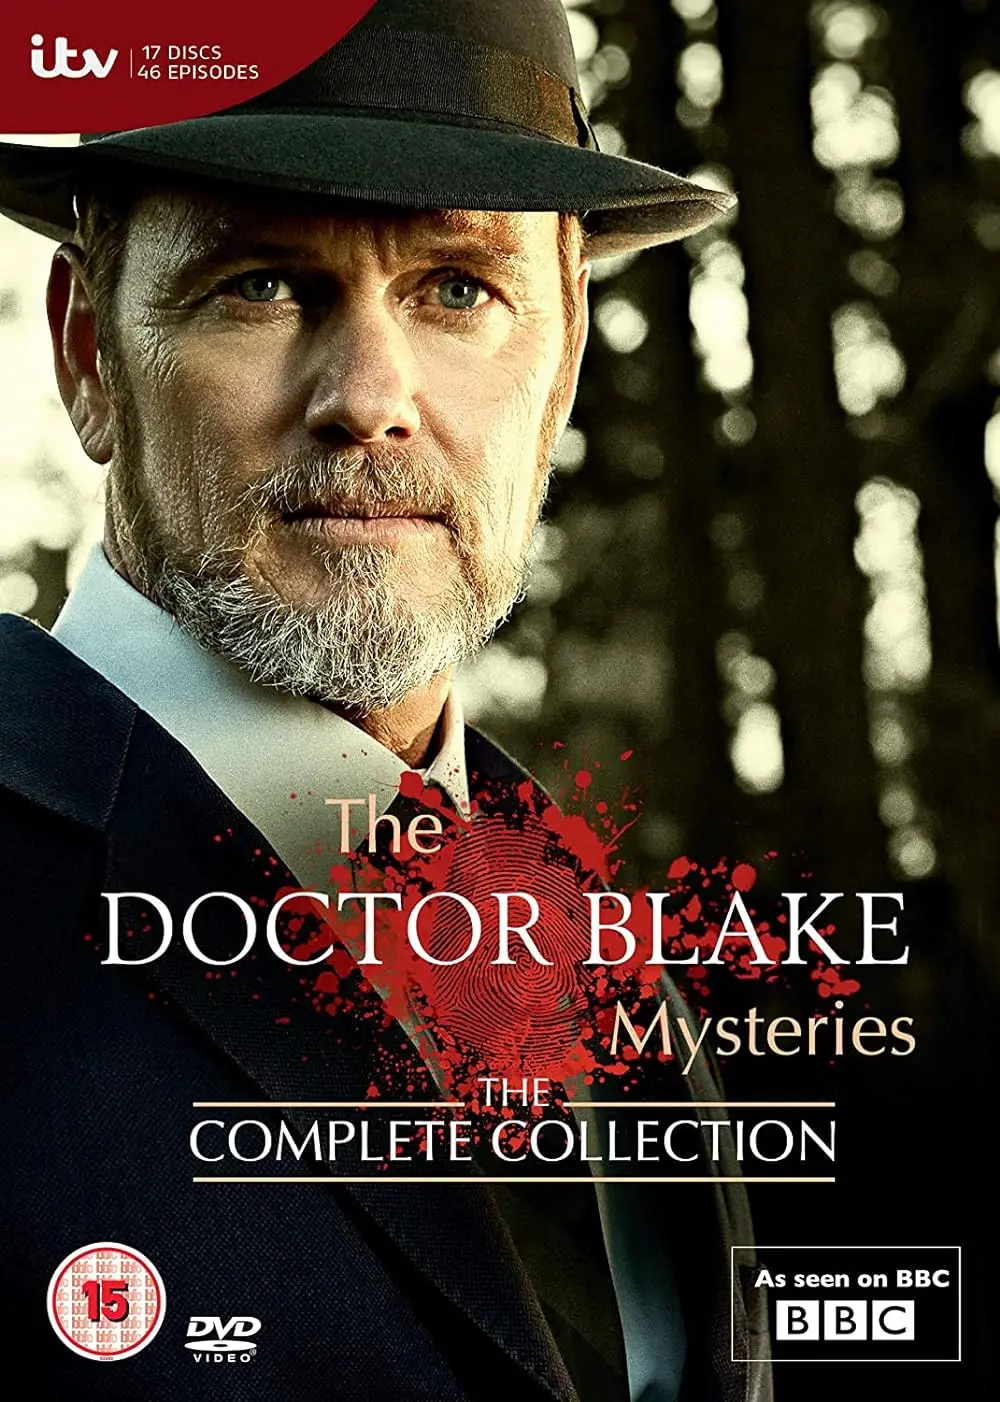 The Doctor Blake Mysteries (2014)